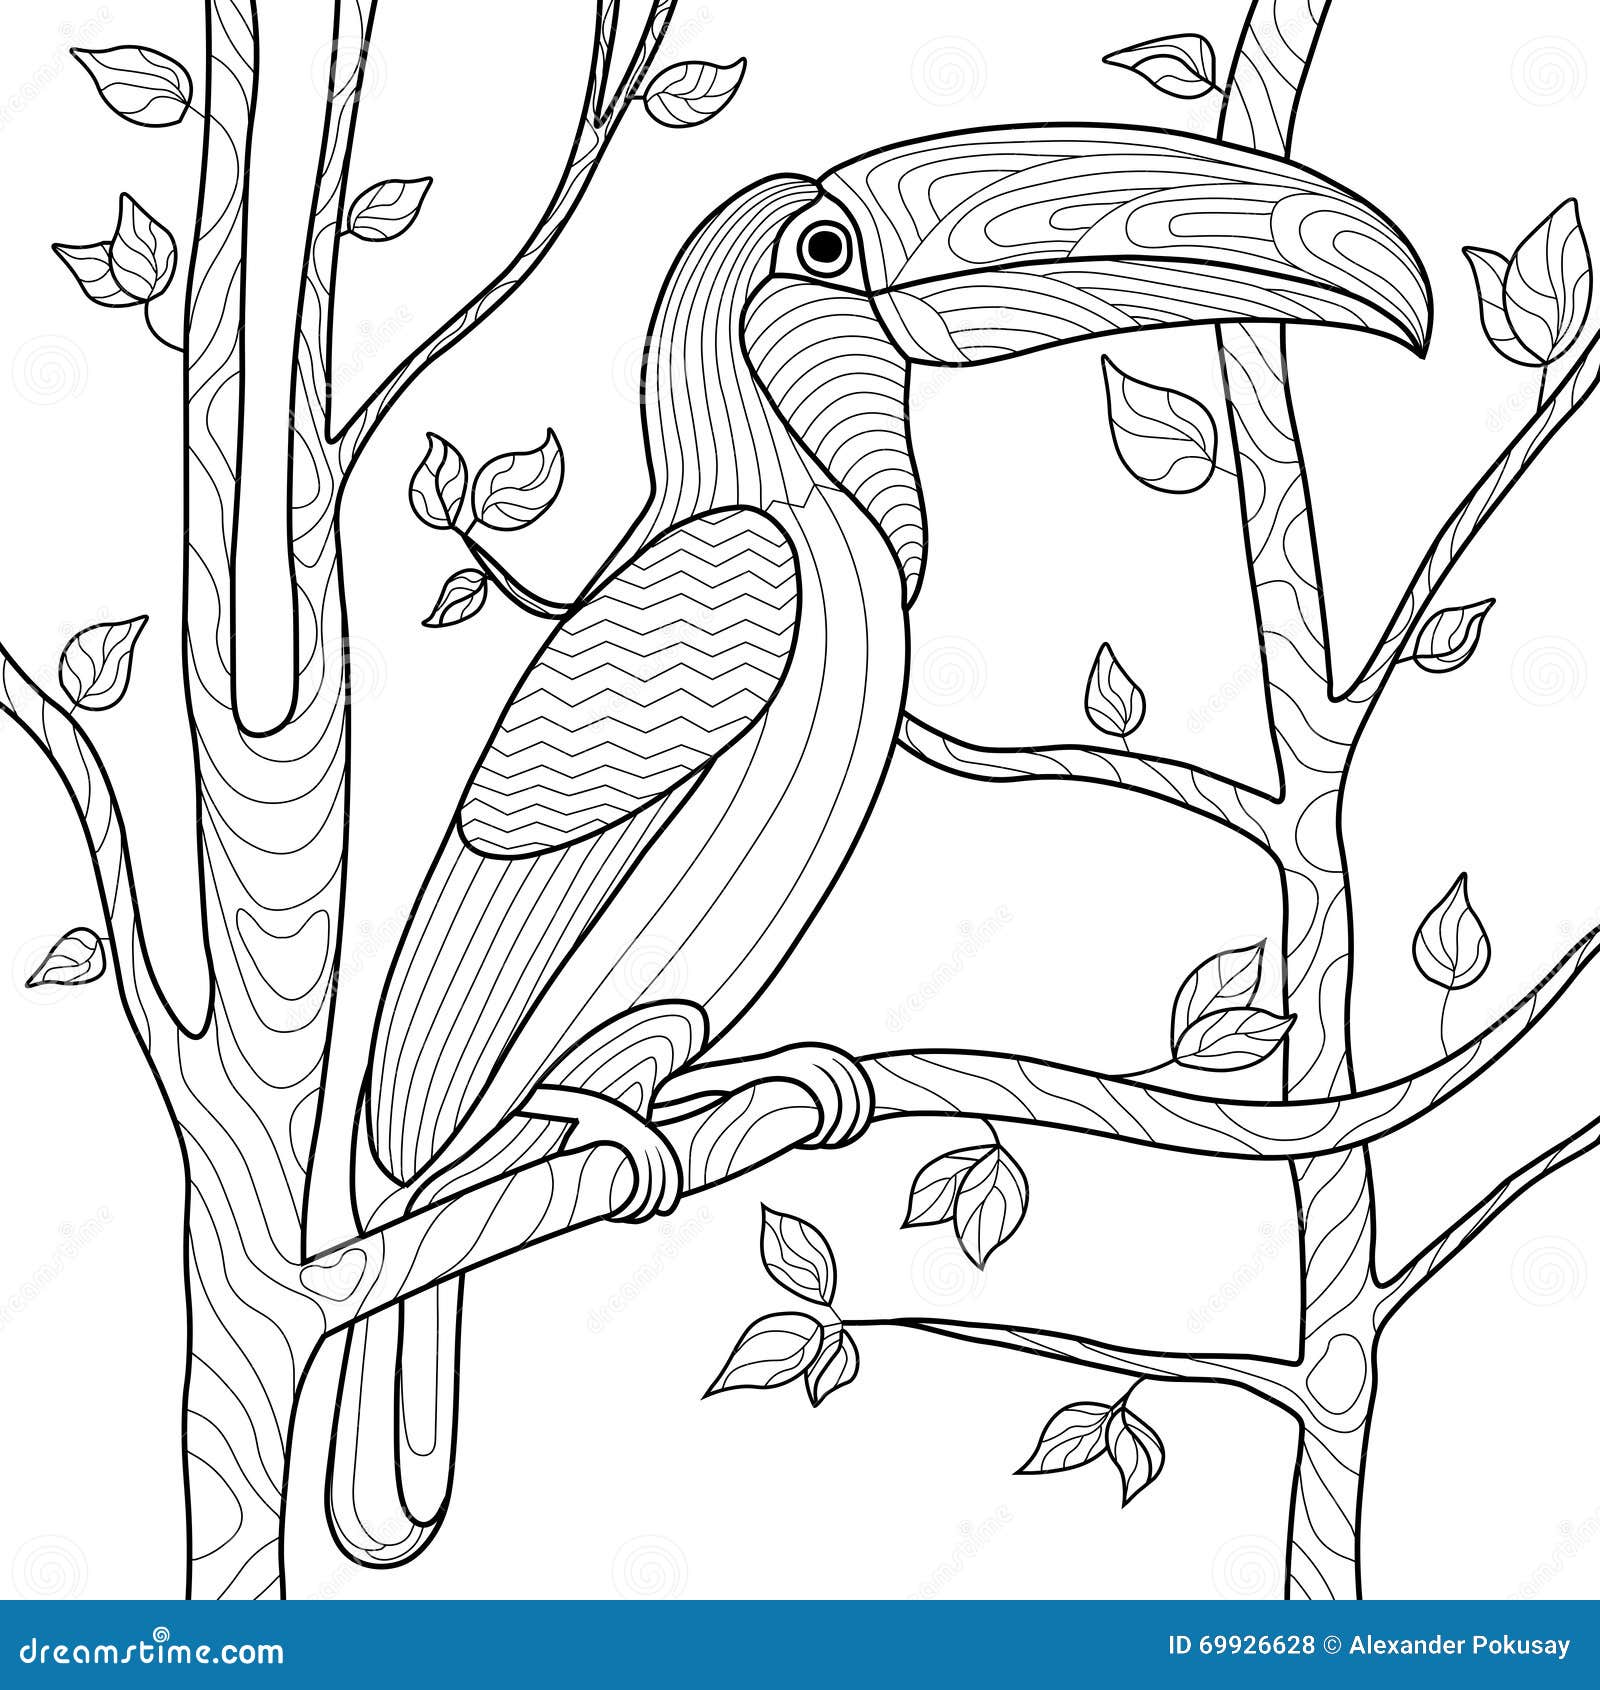 Toucan Coloring Book For Adults Vector Stock Vector ...